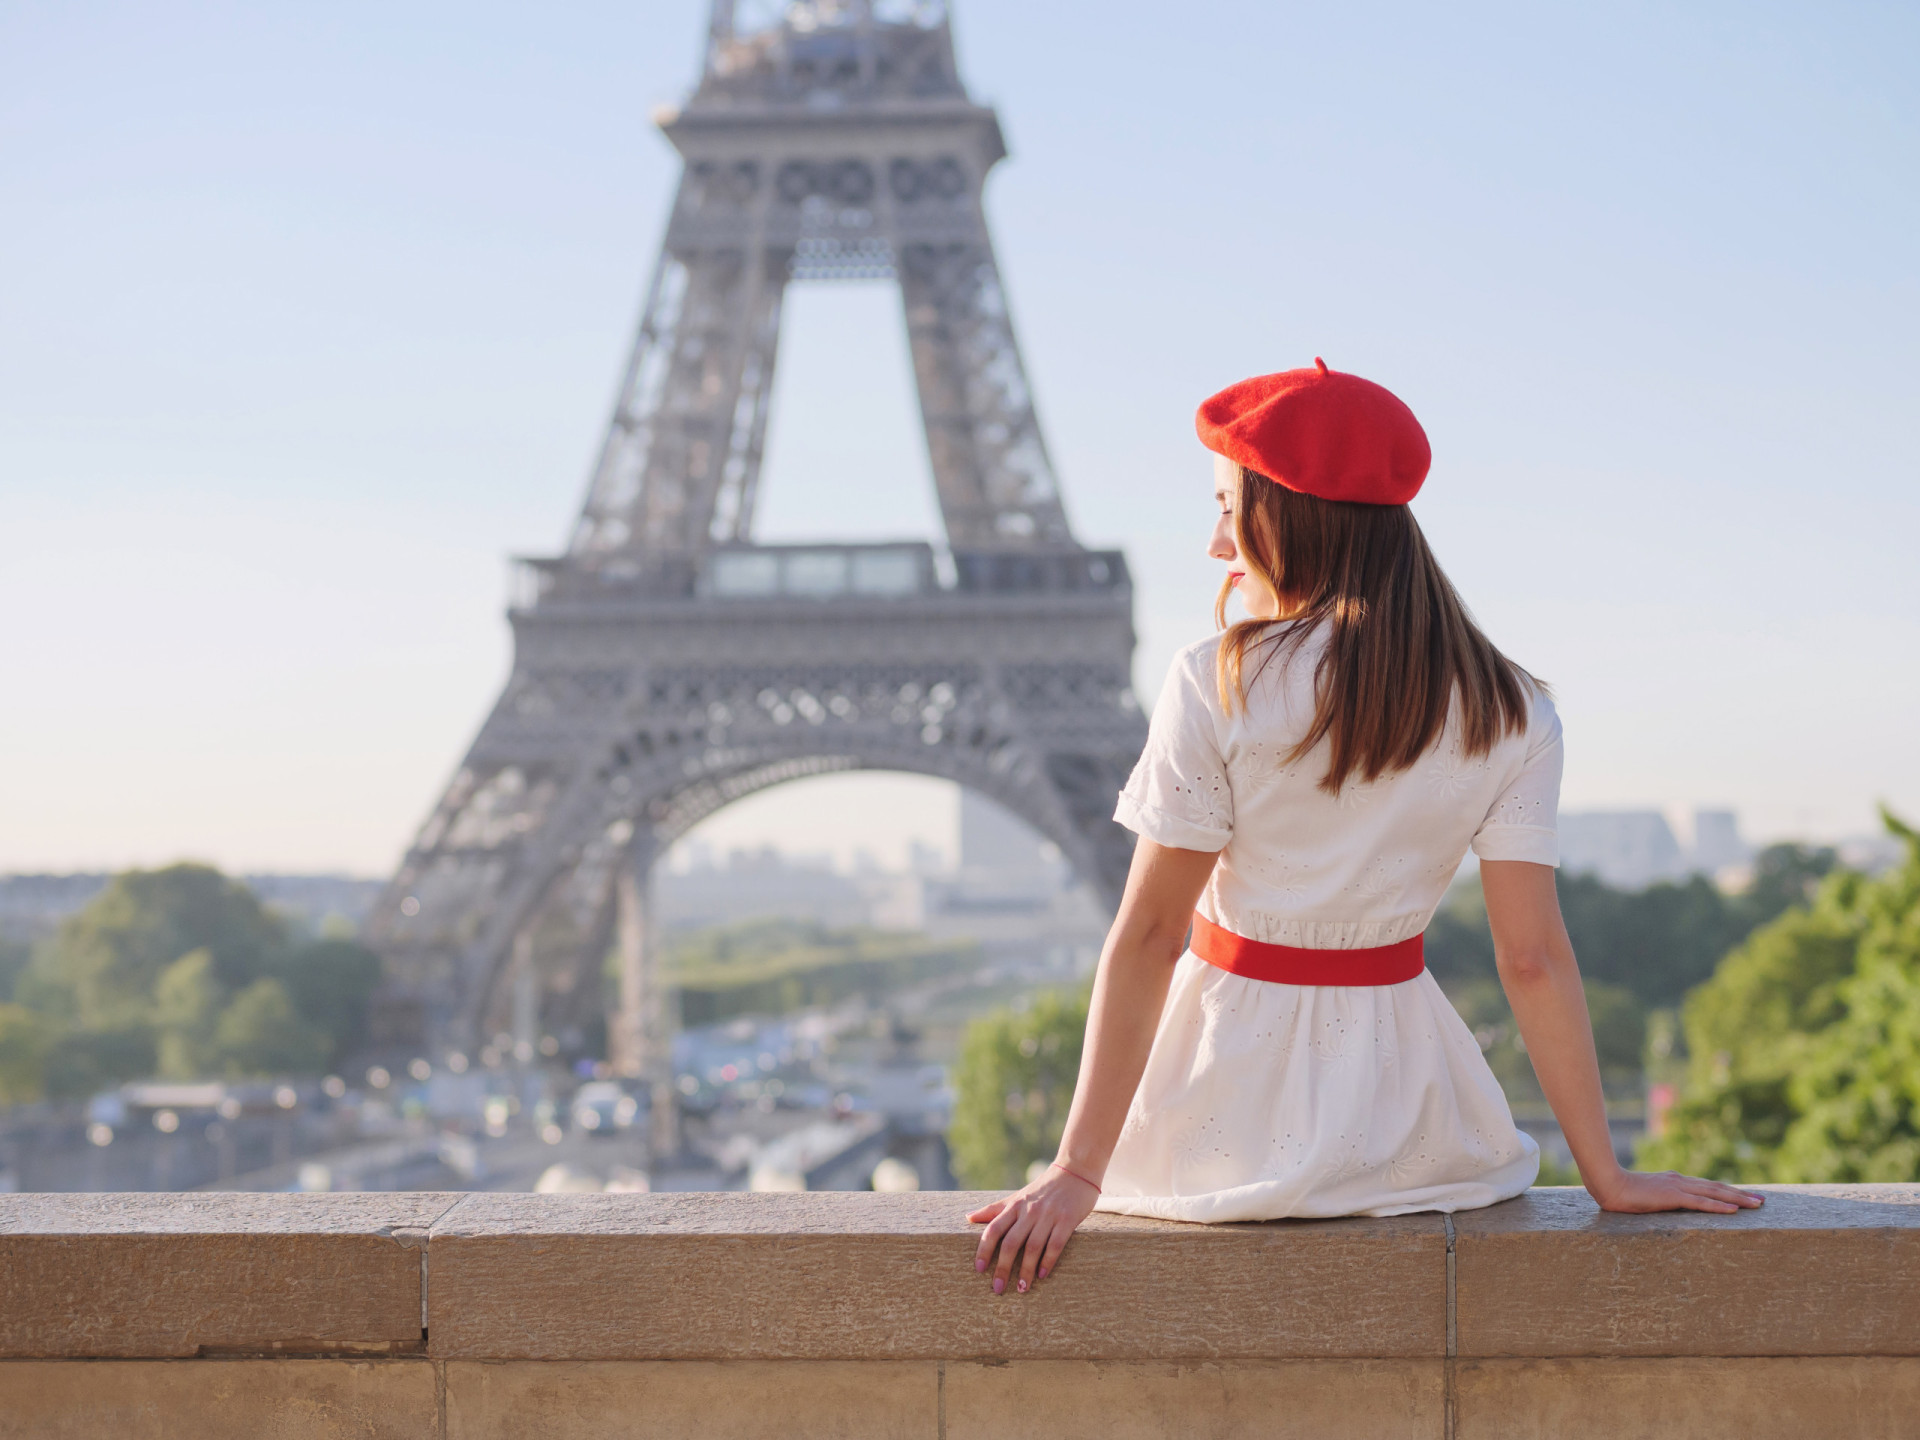 <p>Many people want to visit Paris because of the way it's portrayed in the media. But the reality is that Paris is a real city, and not a romantic comedy like 'Amélie' (2001).</p><p>You may also like:<a href="https://www.starsinsider.com/n/214578?utm_source=msn.com&utm_medium=display&utm_campaign=referral_description&utm_content=524572en-us"> The most random things foreigners dub as \"American\" but really aren't</a></p>